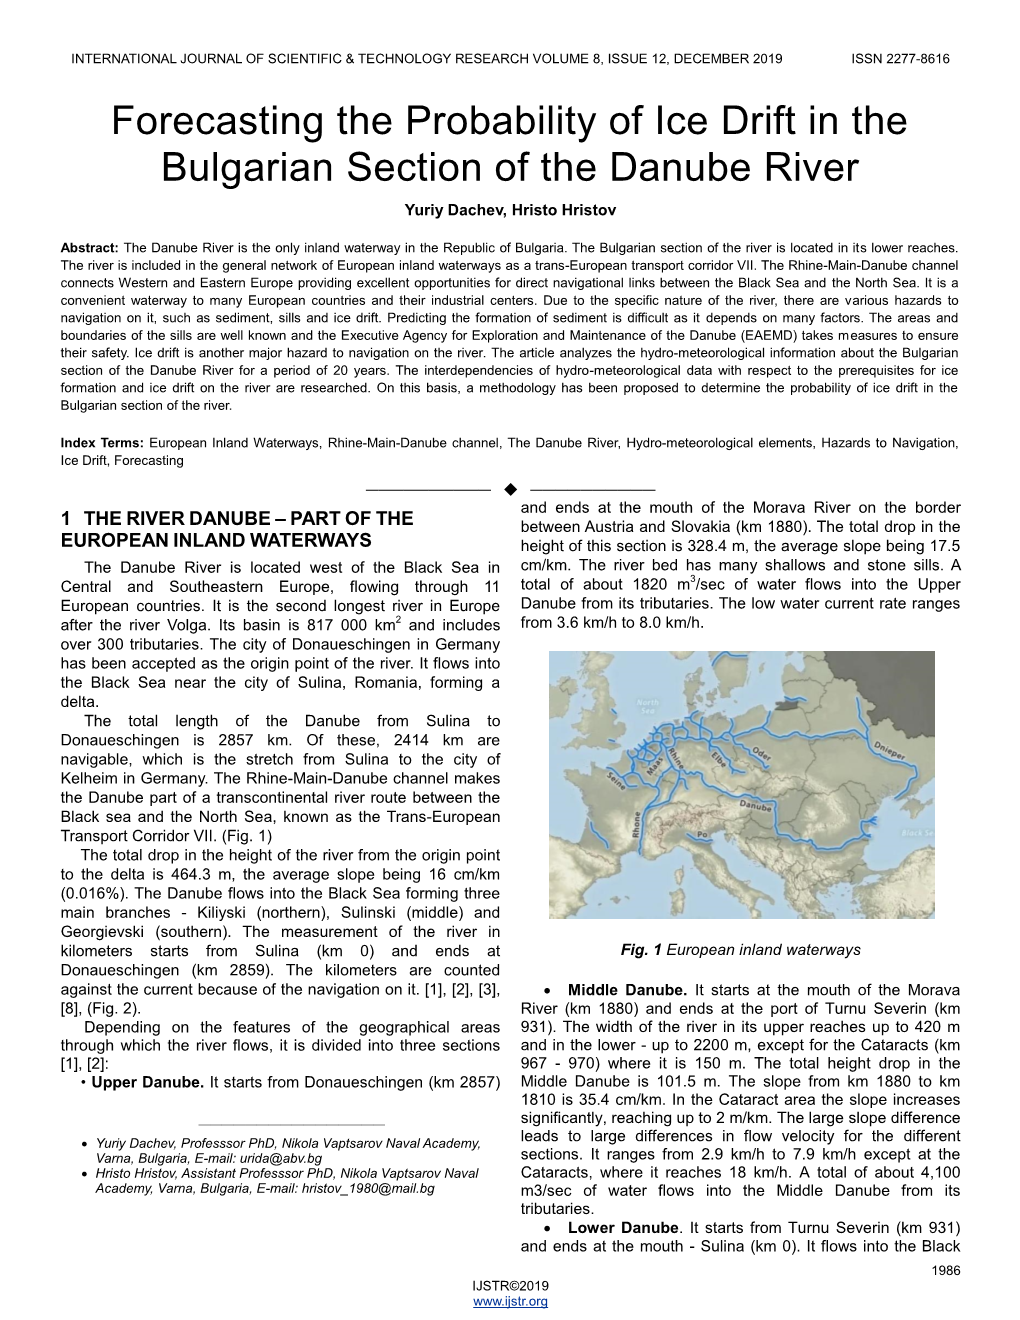 Forecasting the Probability of Ice Drift in the Bulgarian Section of the Danube River Yuriy Dachev, Hristo Hristov